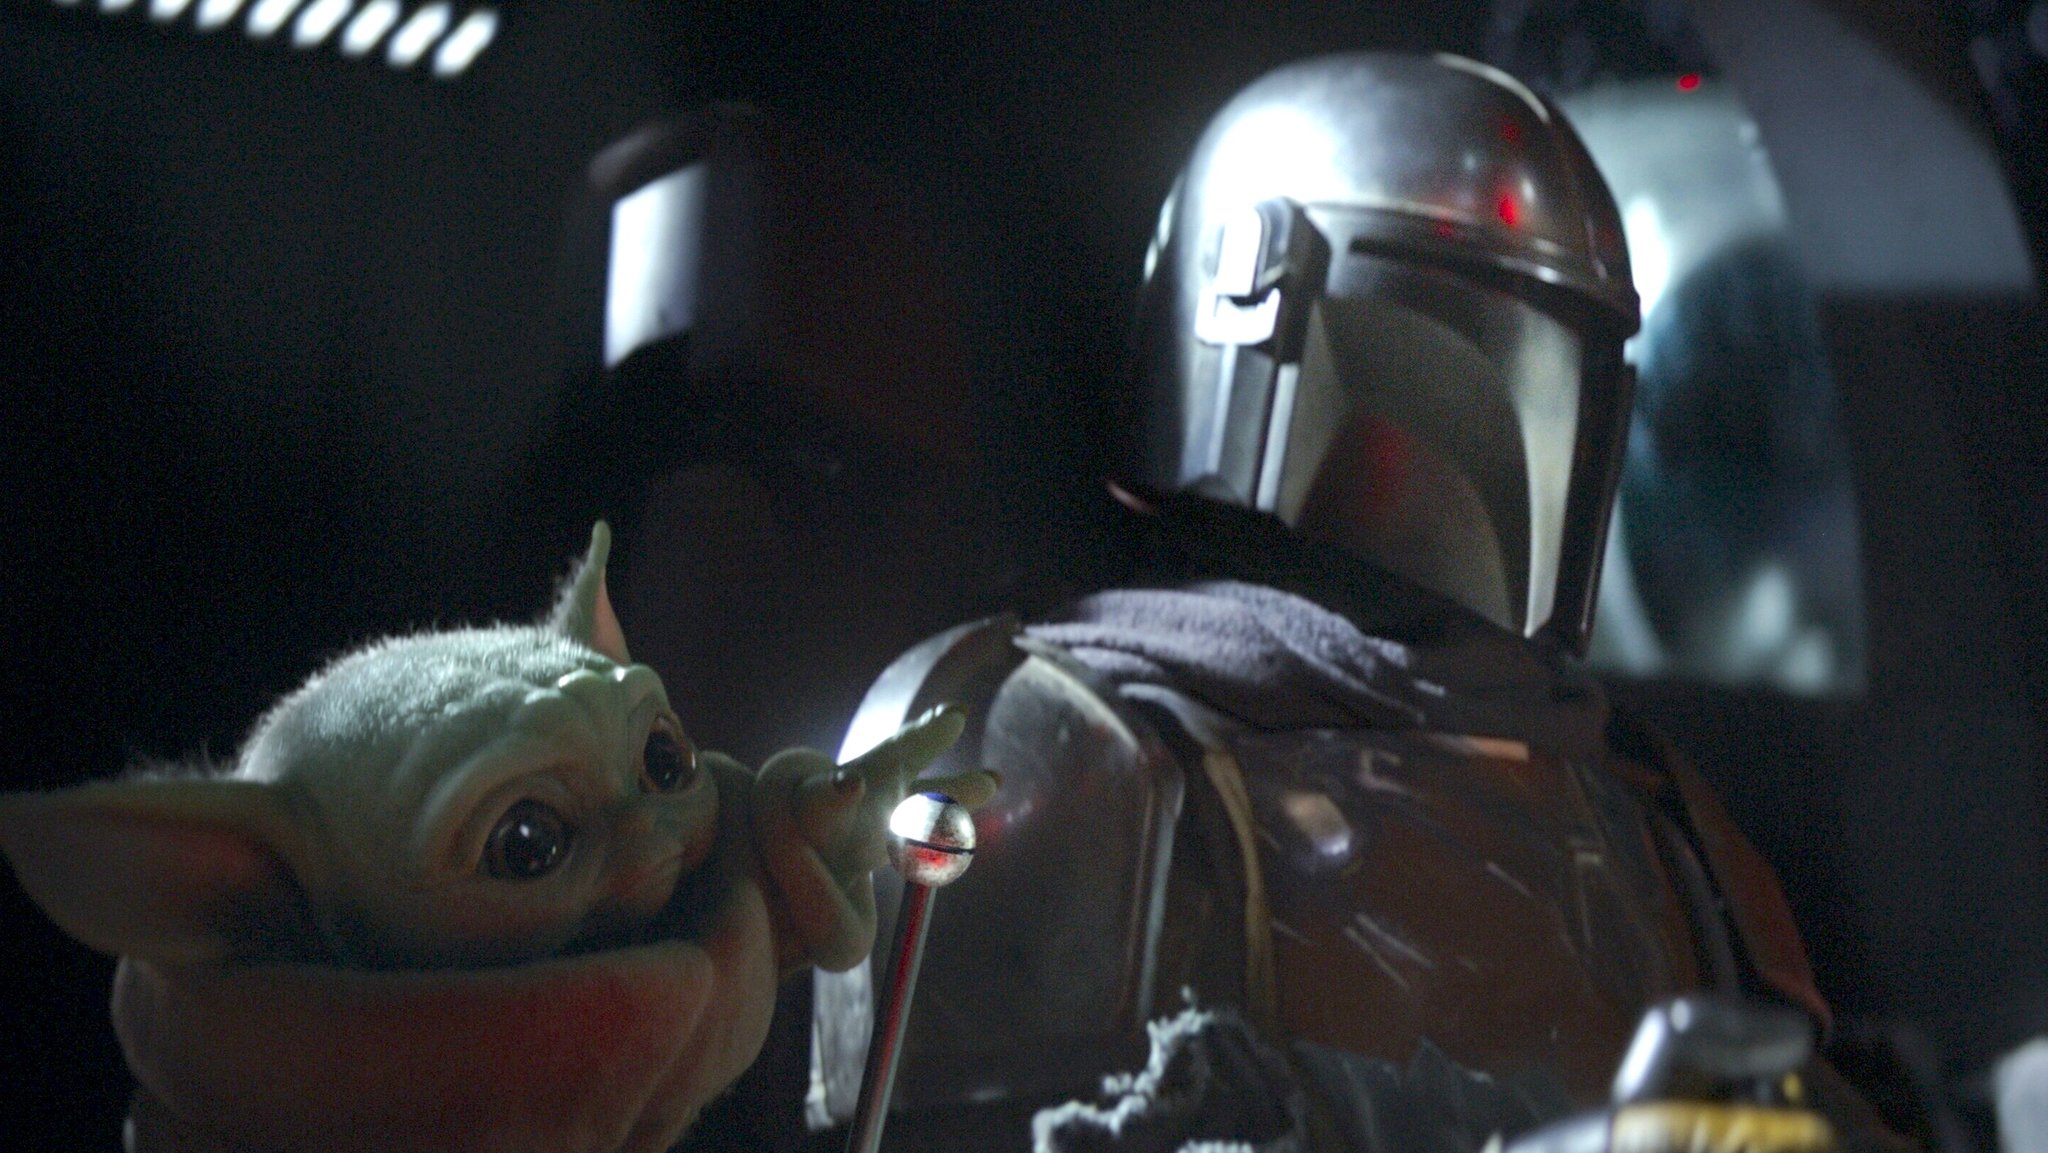 ‘The Mandalorian’ Star Reveals “Mando’s” Real Name and Being Outshined by “Baby Yoda”